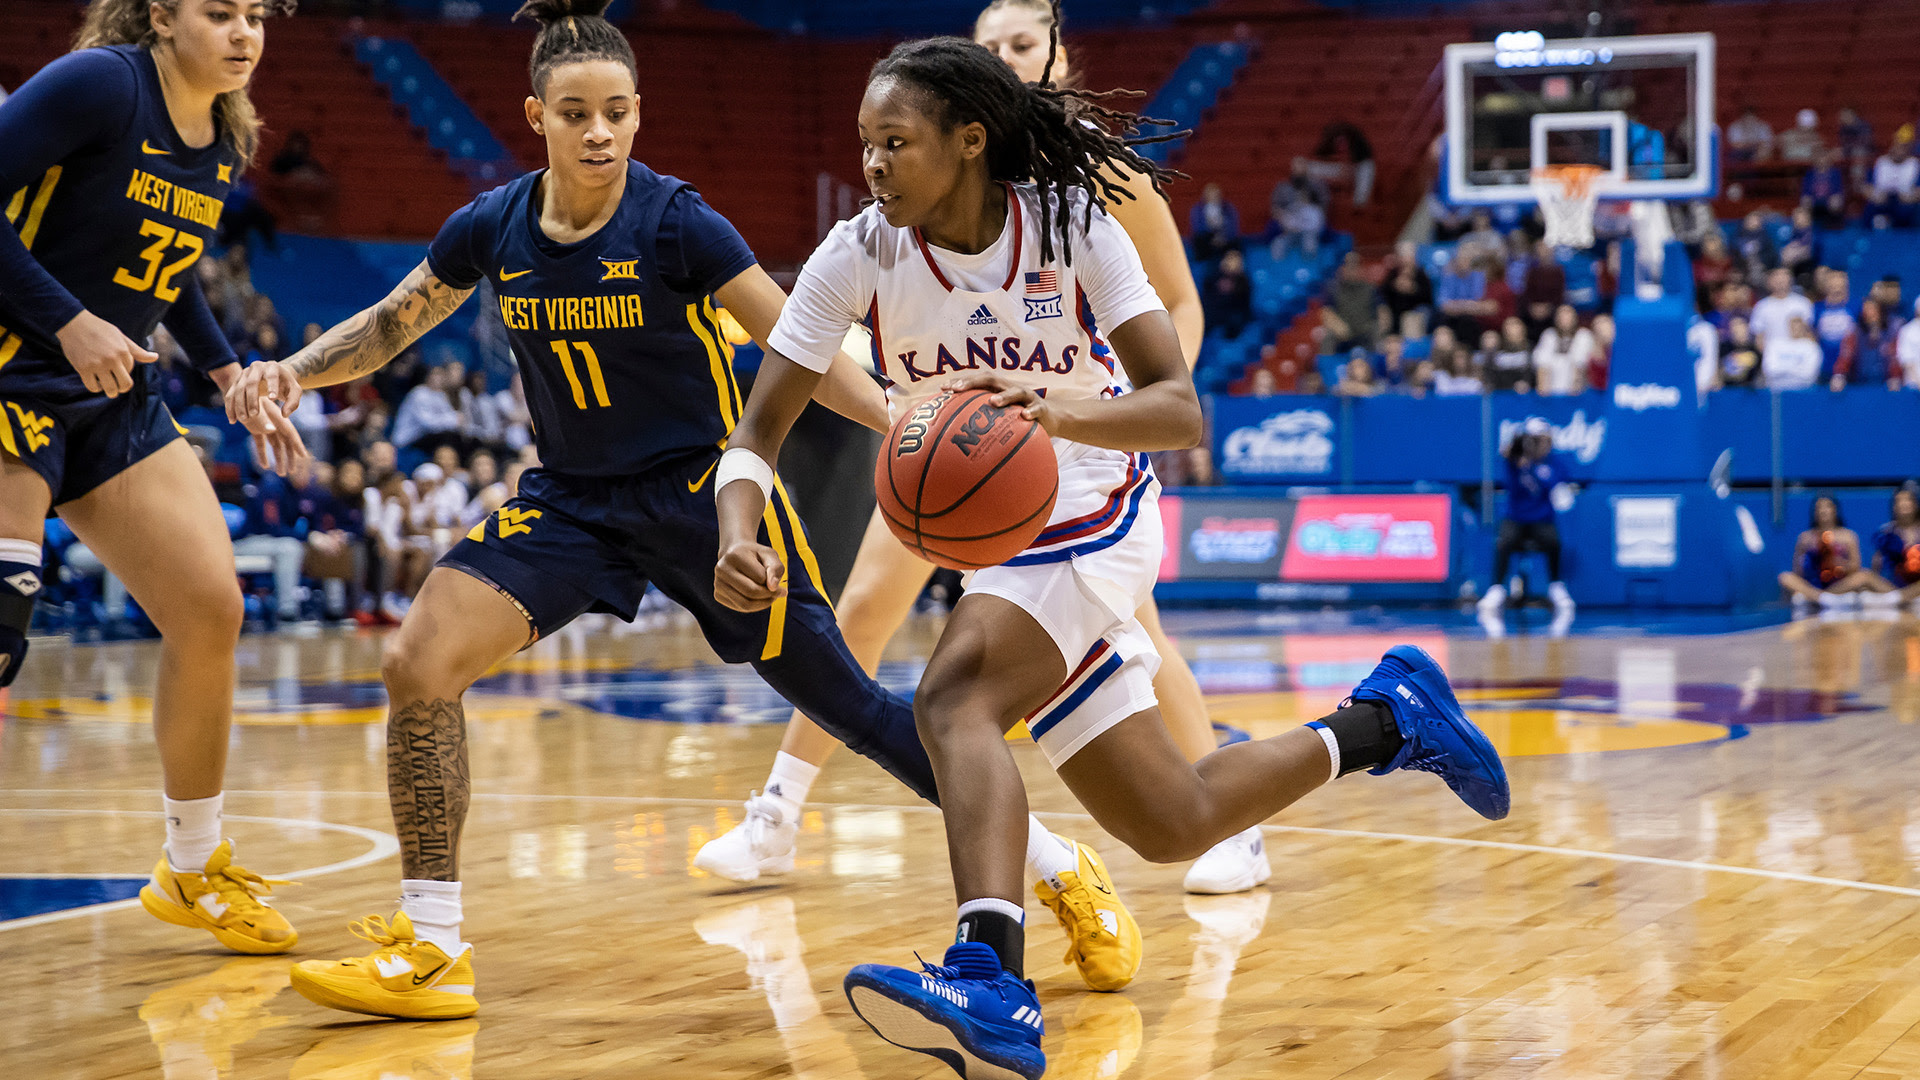 Jayhawks at Home Saturday to Face No